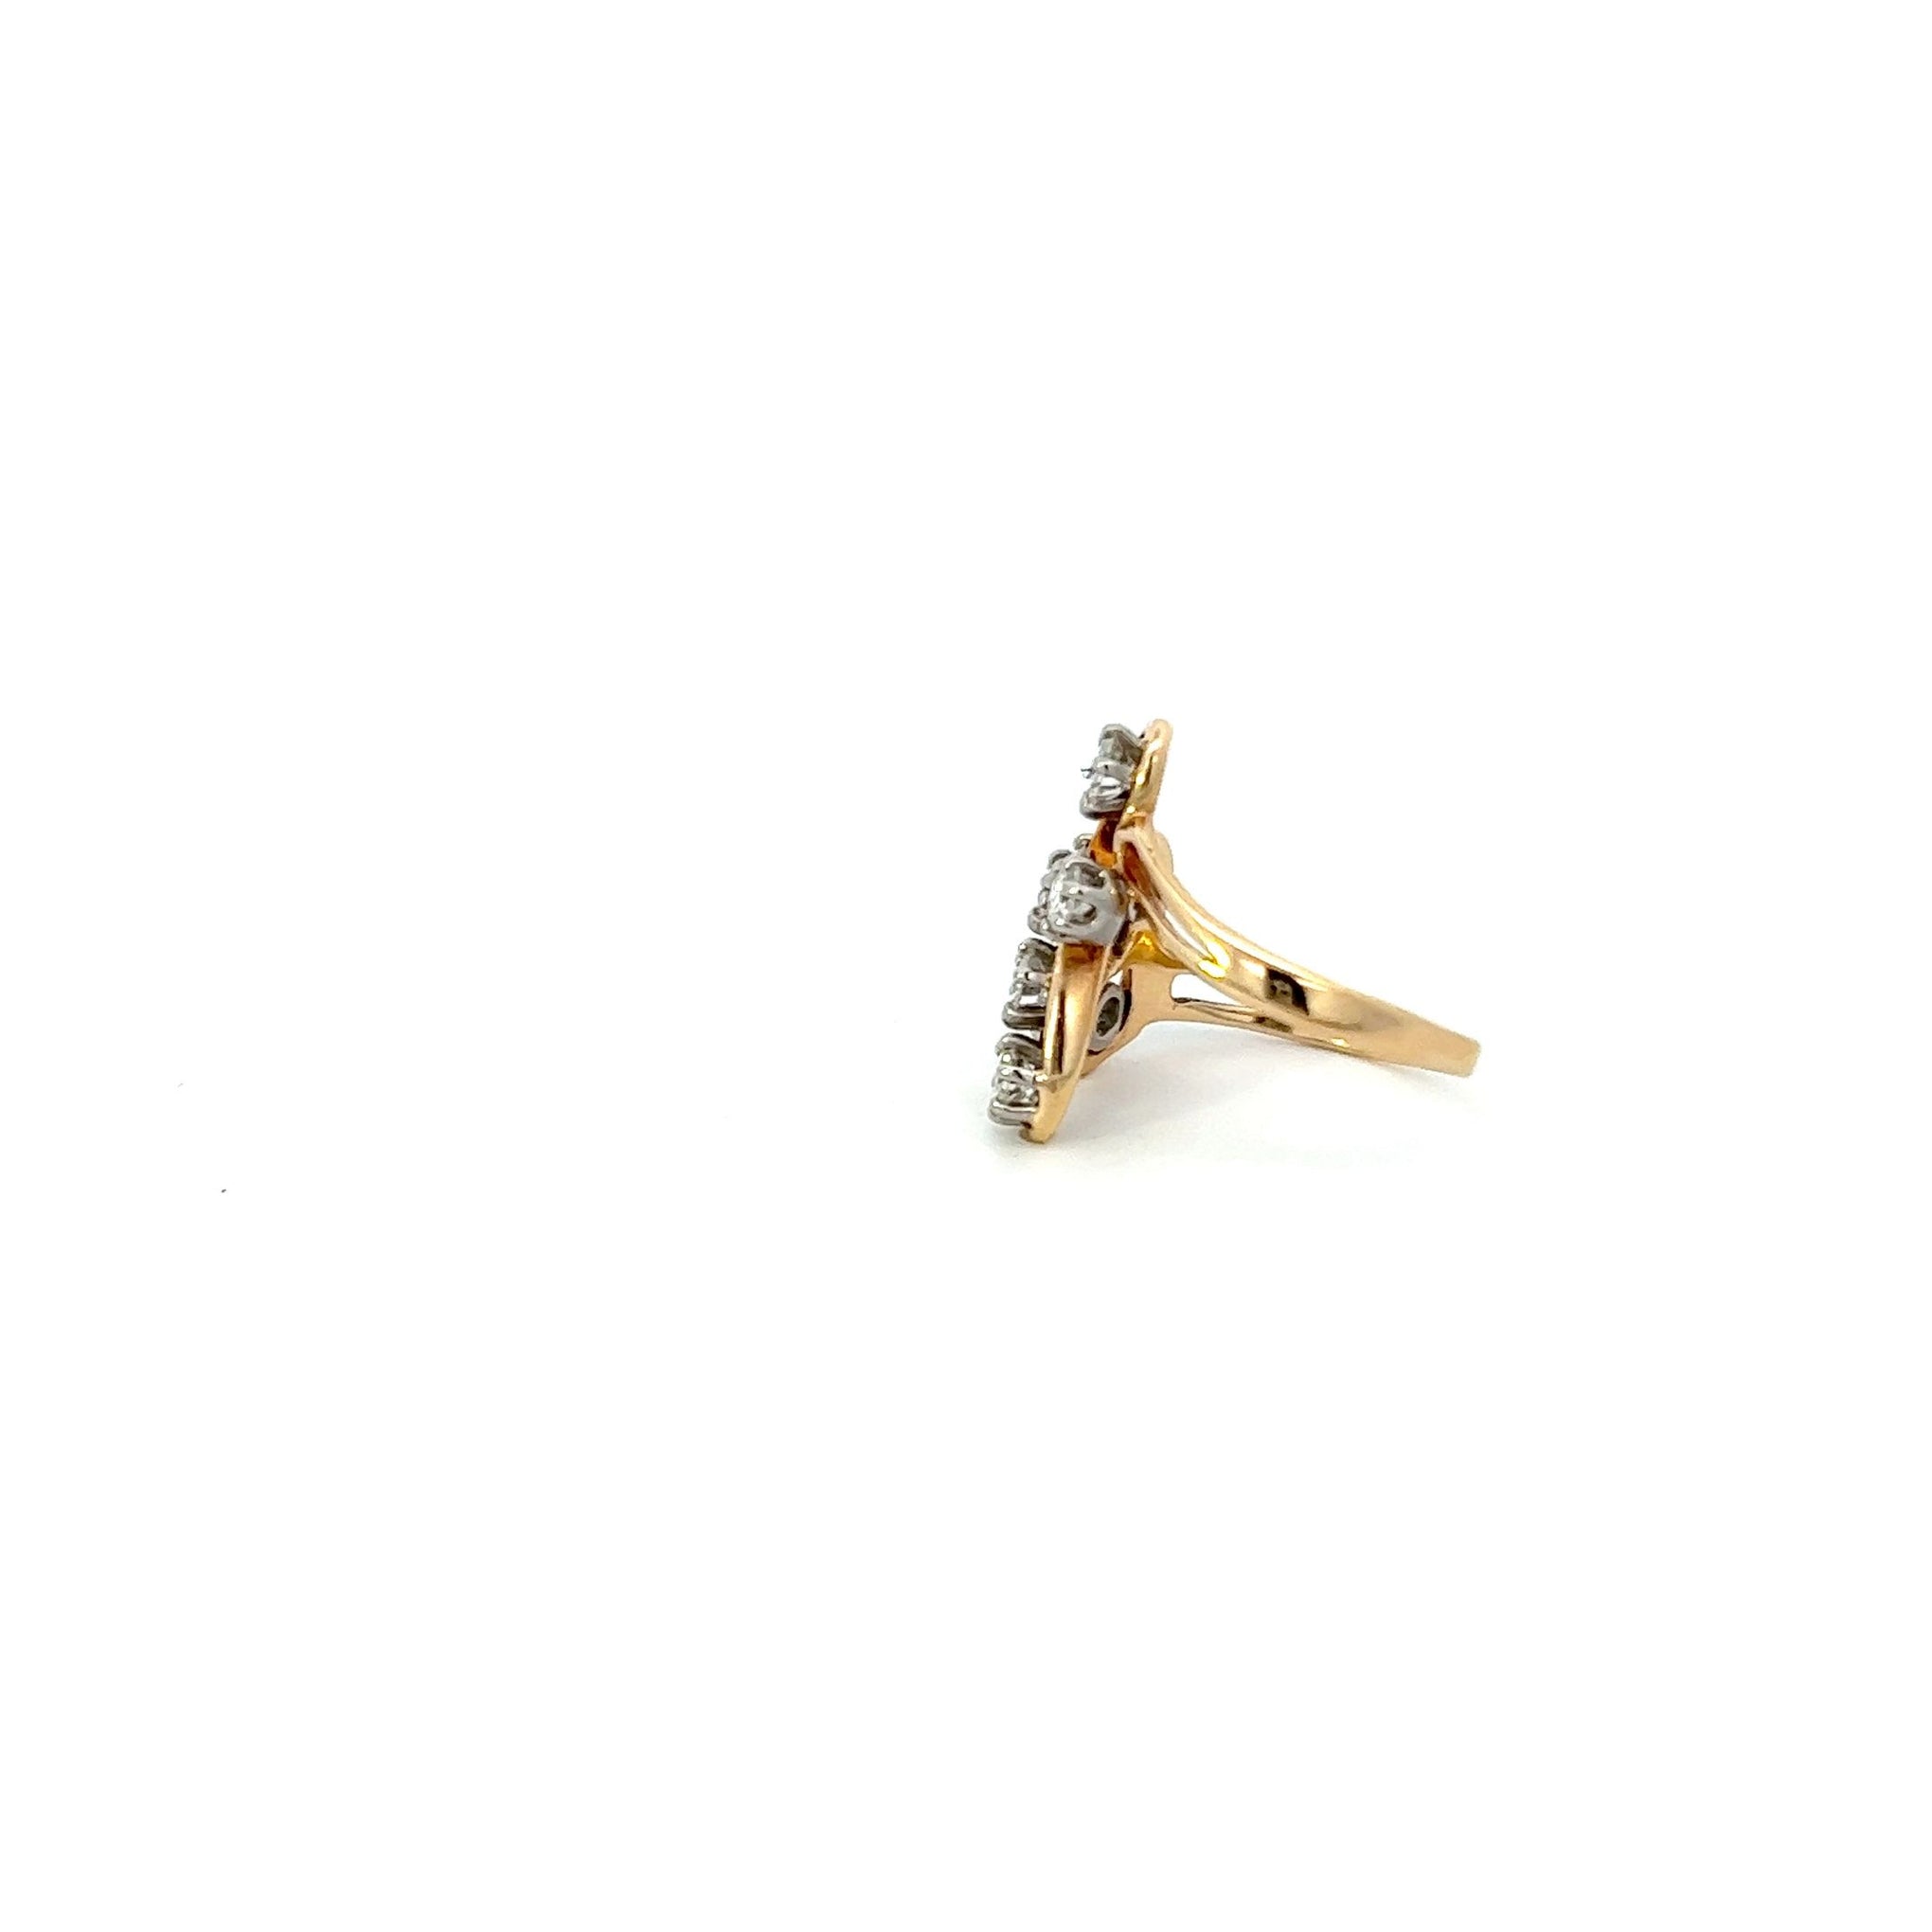 VINTAGE, 14KT YELLOW GOLD AND 7 ROUND CUT DIAMOND RING.